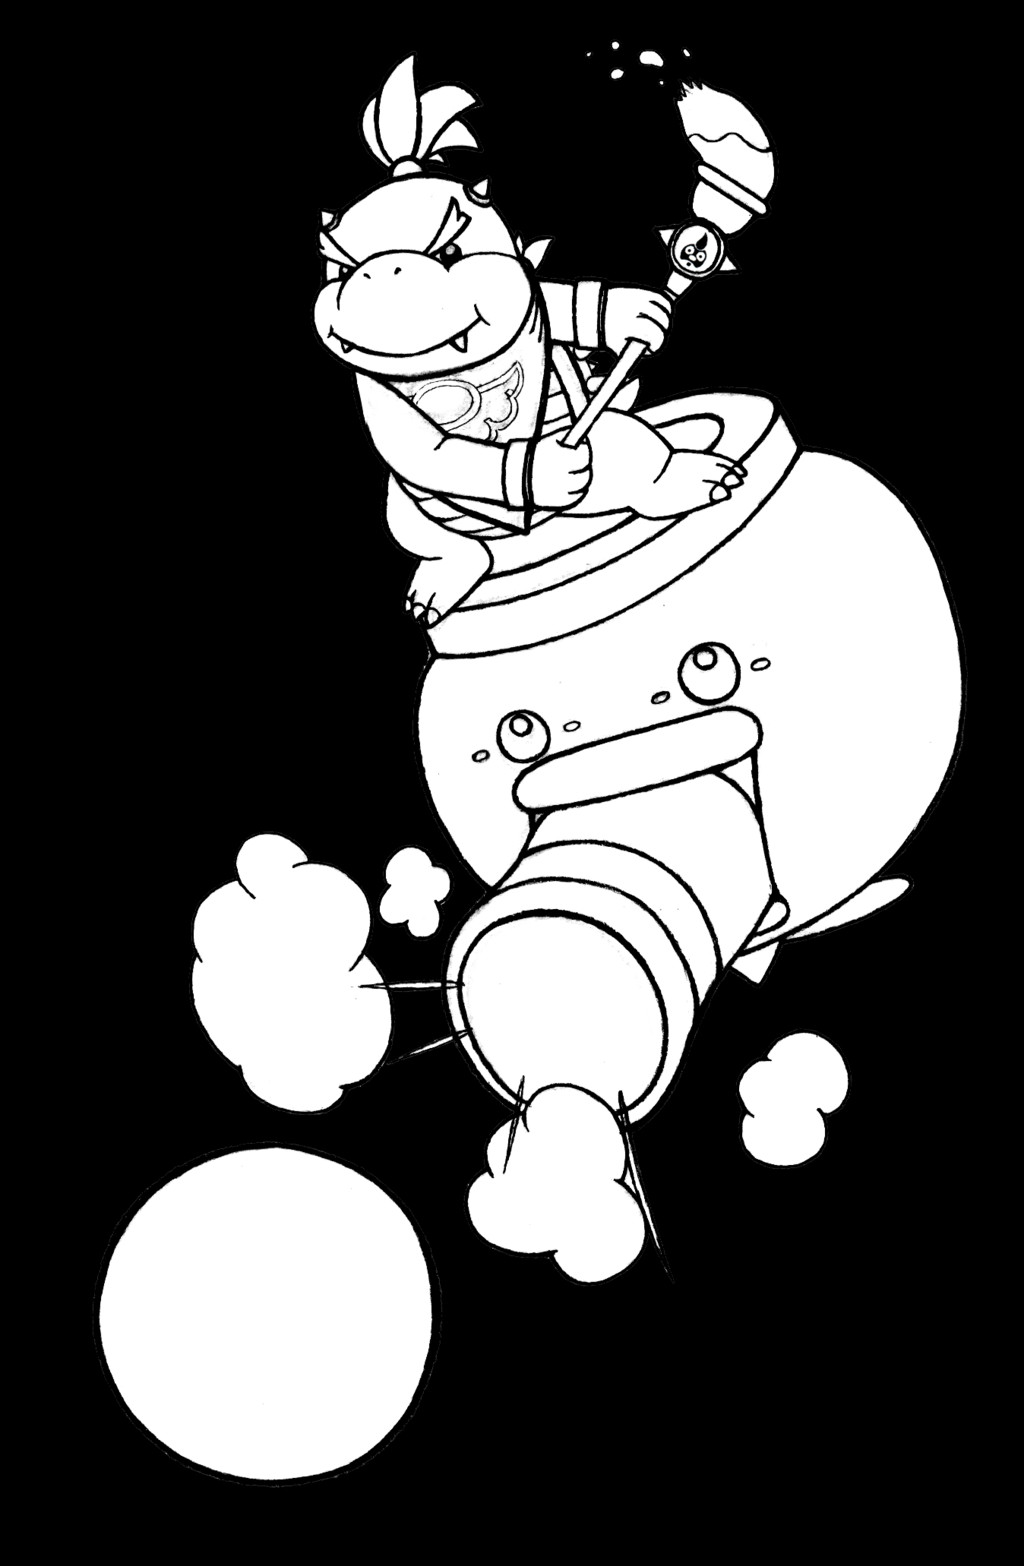 Bowser Jr Coloring Pages
 Bowser Jr Clowns the petition by realarpmbq on DeviantArt